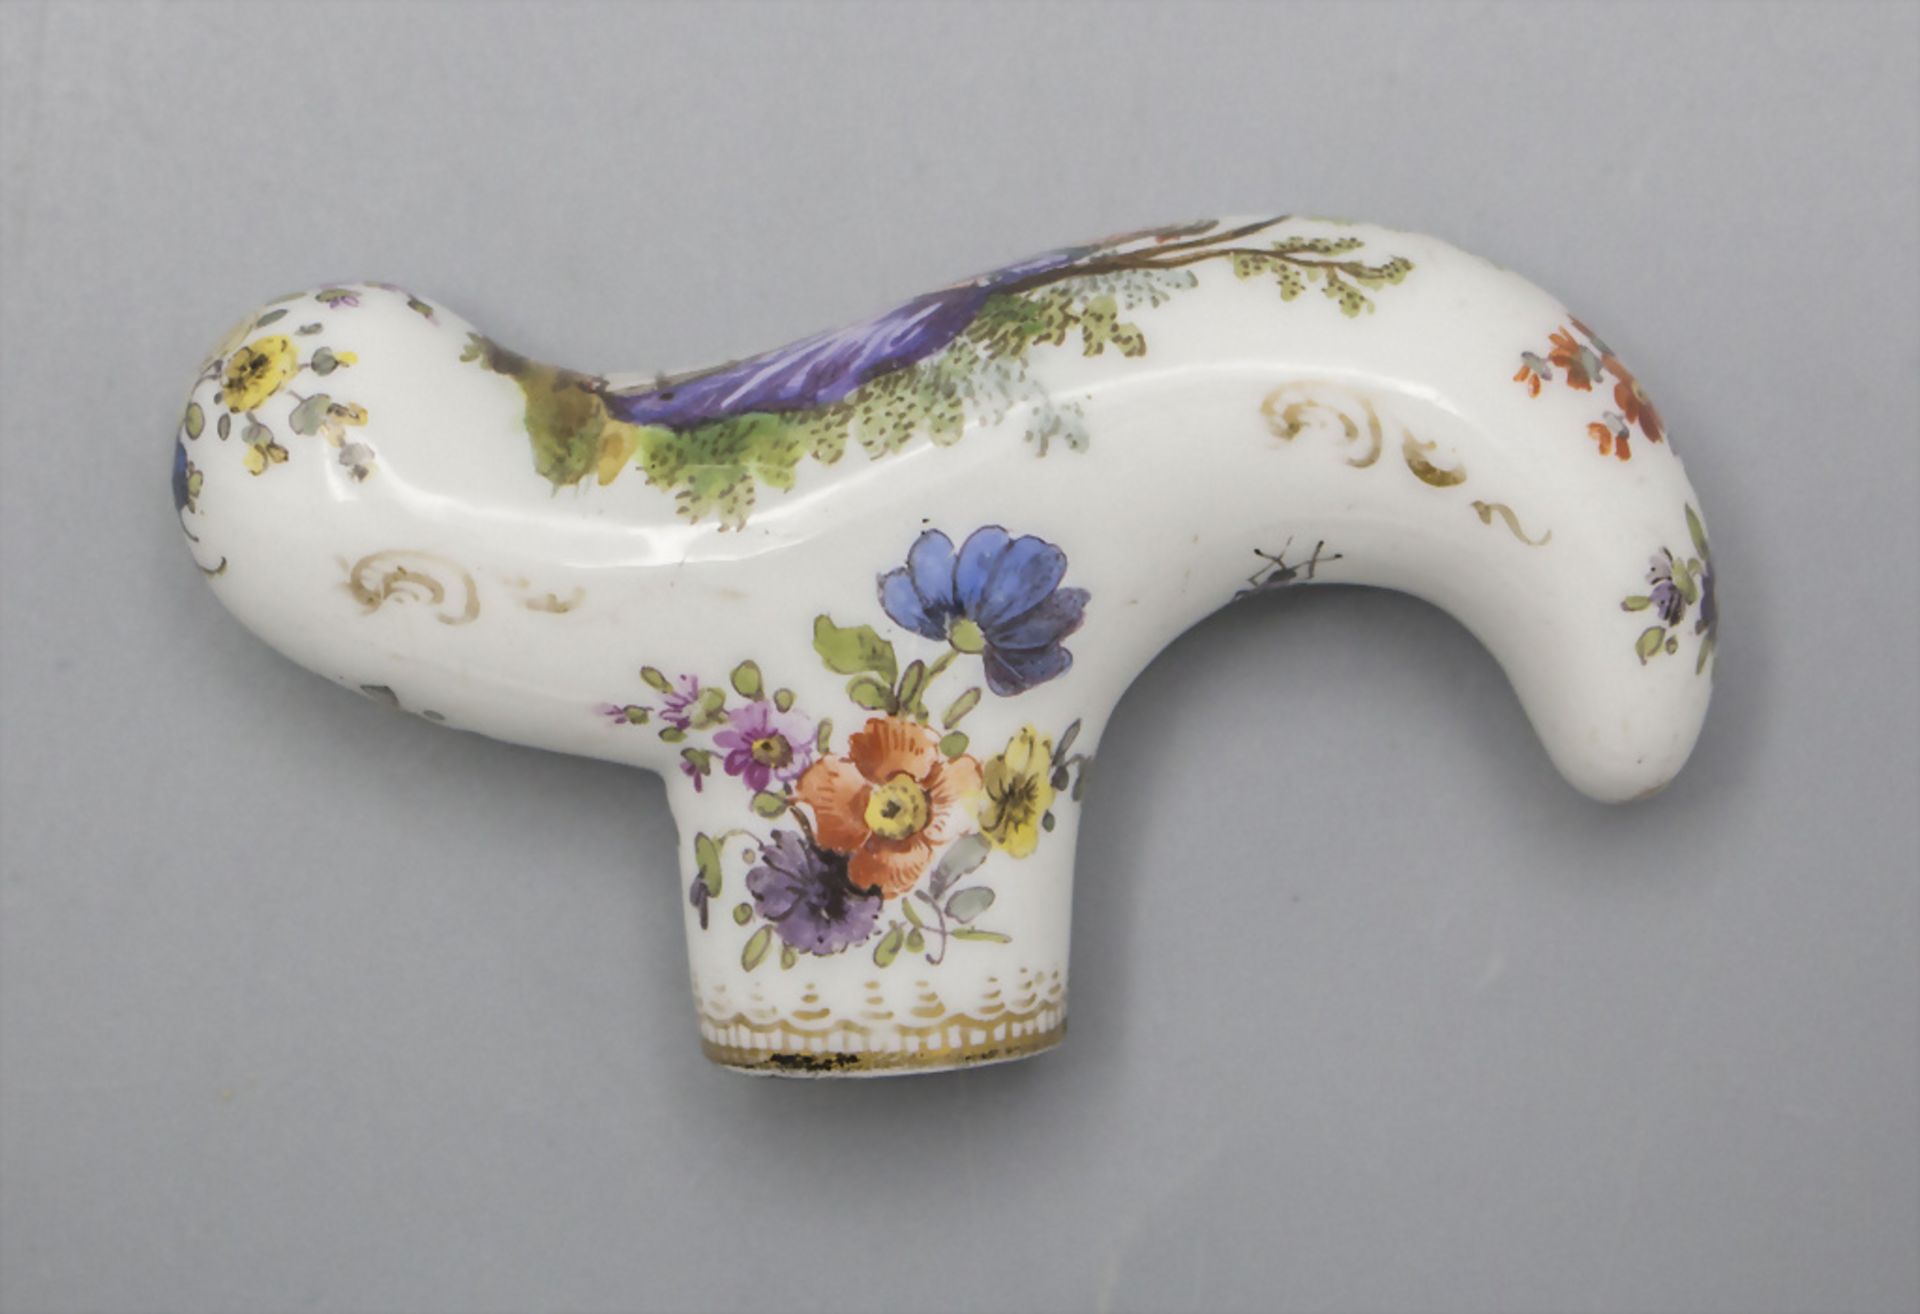 Stockgriff mit Watteauszene / A cane handle with courting scene, wohl Meissen, 19. Jh. - Image 4 of 4